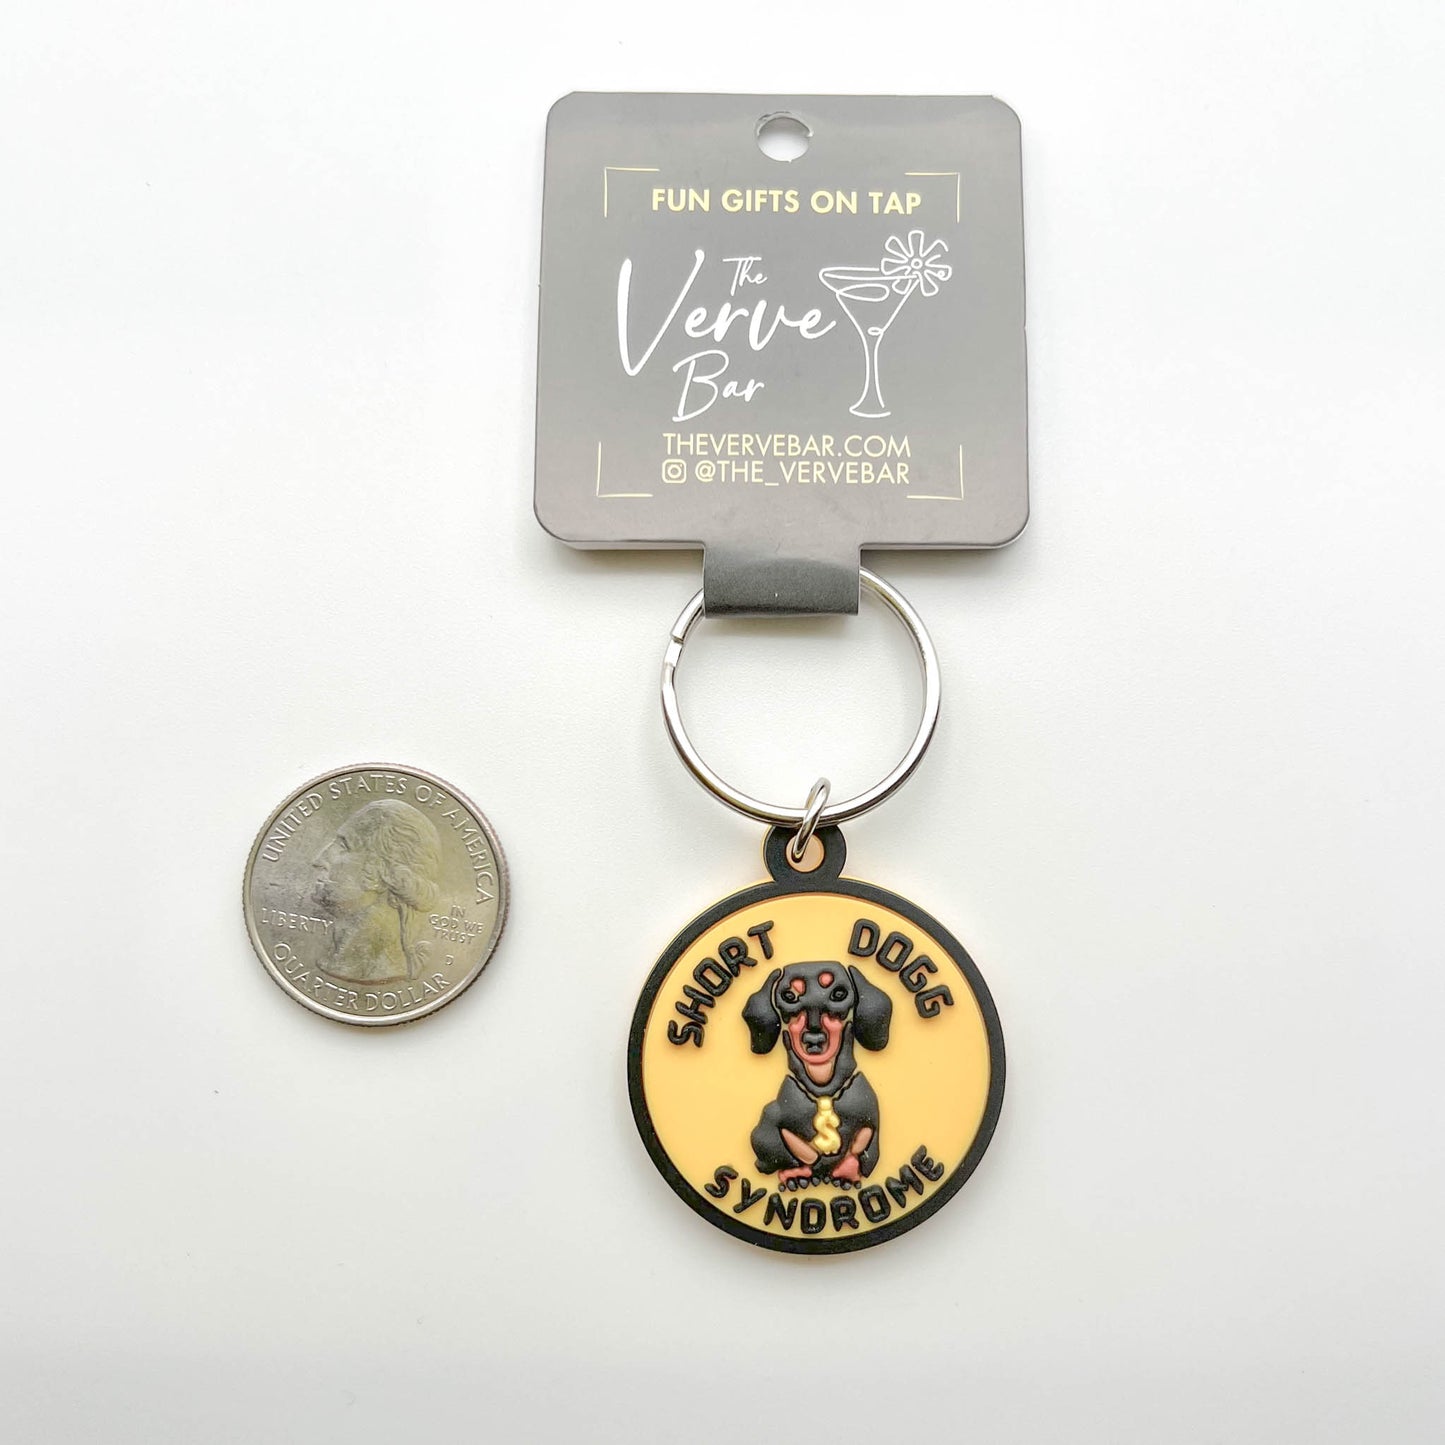 The Best Dachshund Gift 'Short Dogg Syndrome' Collar Charm